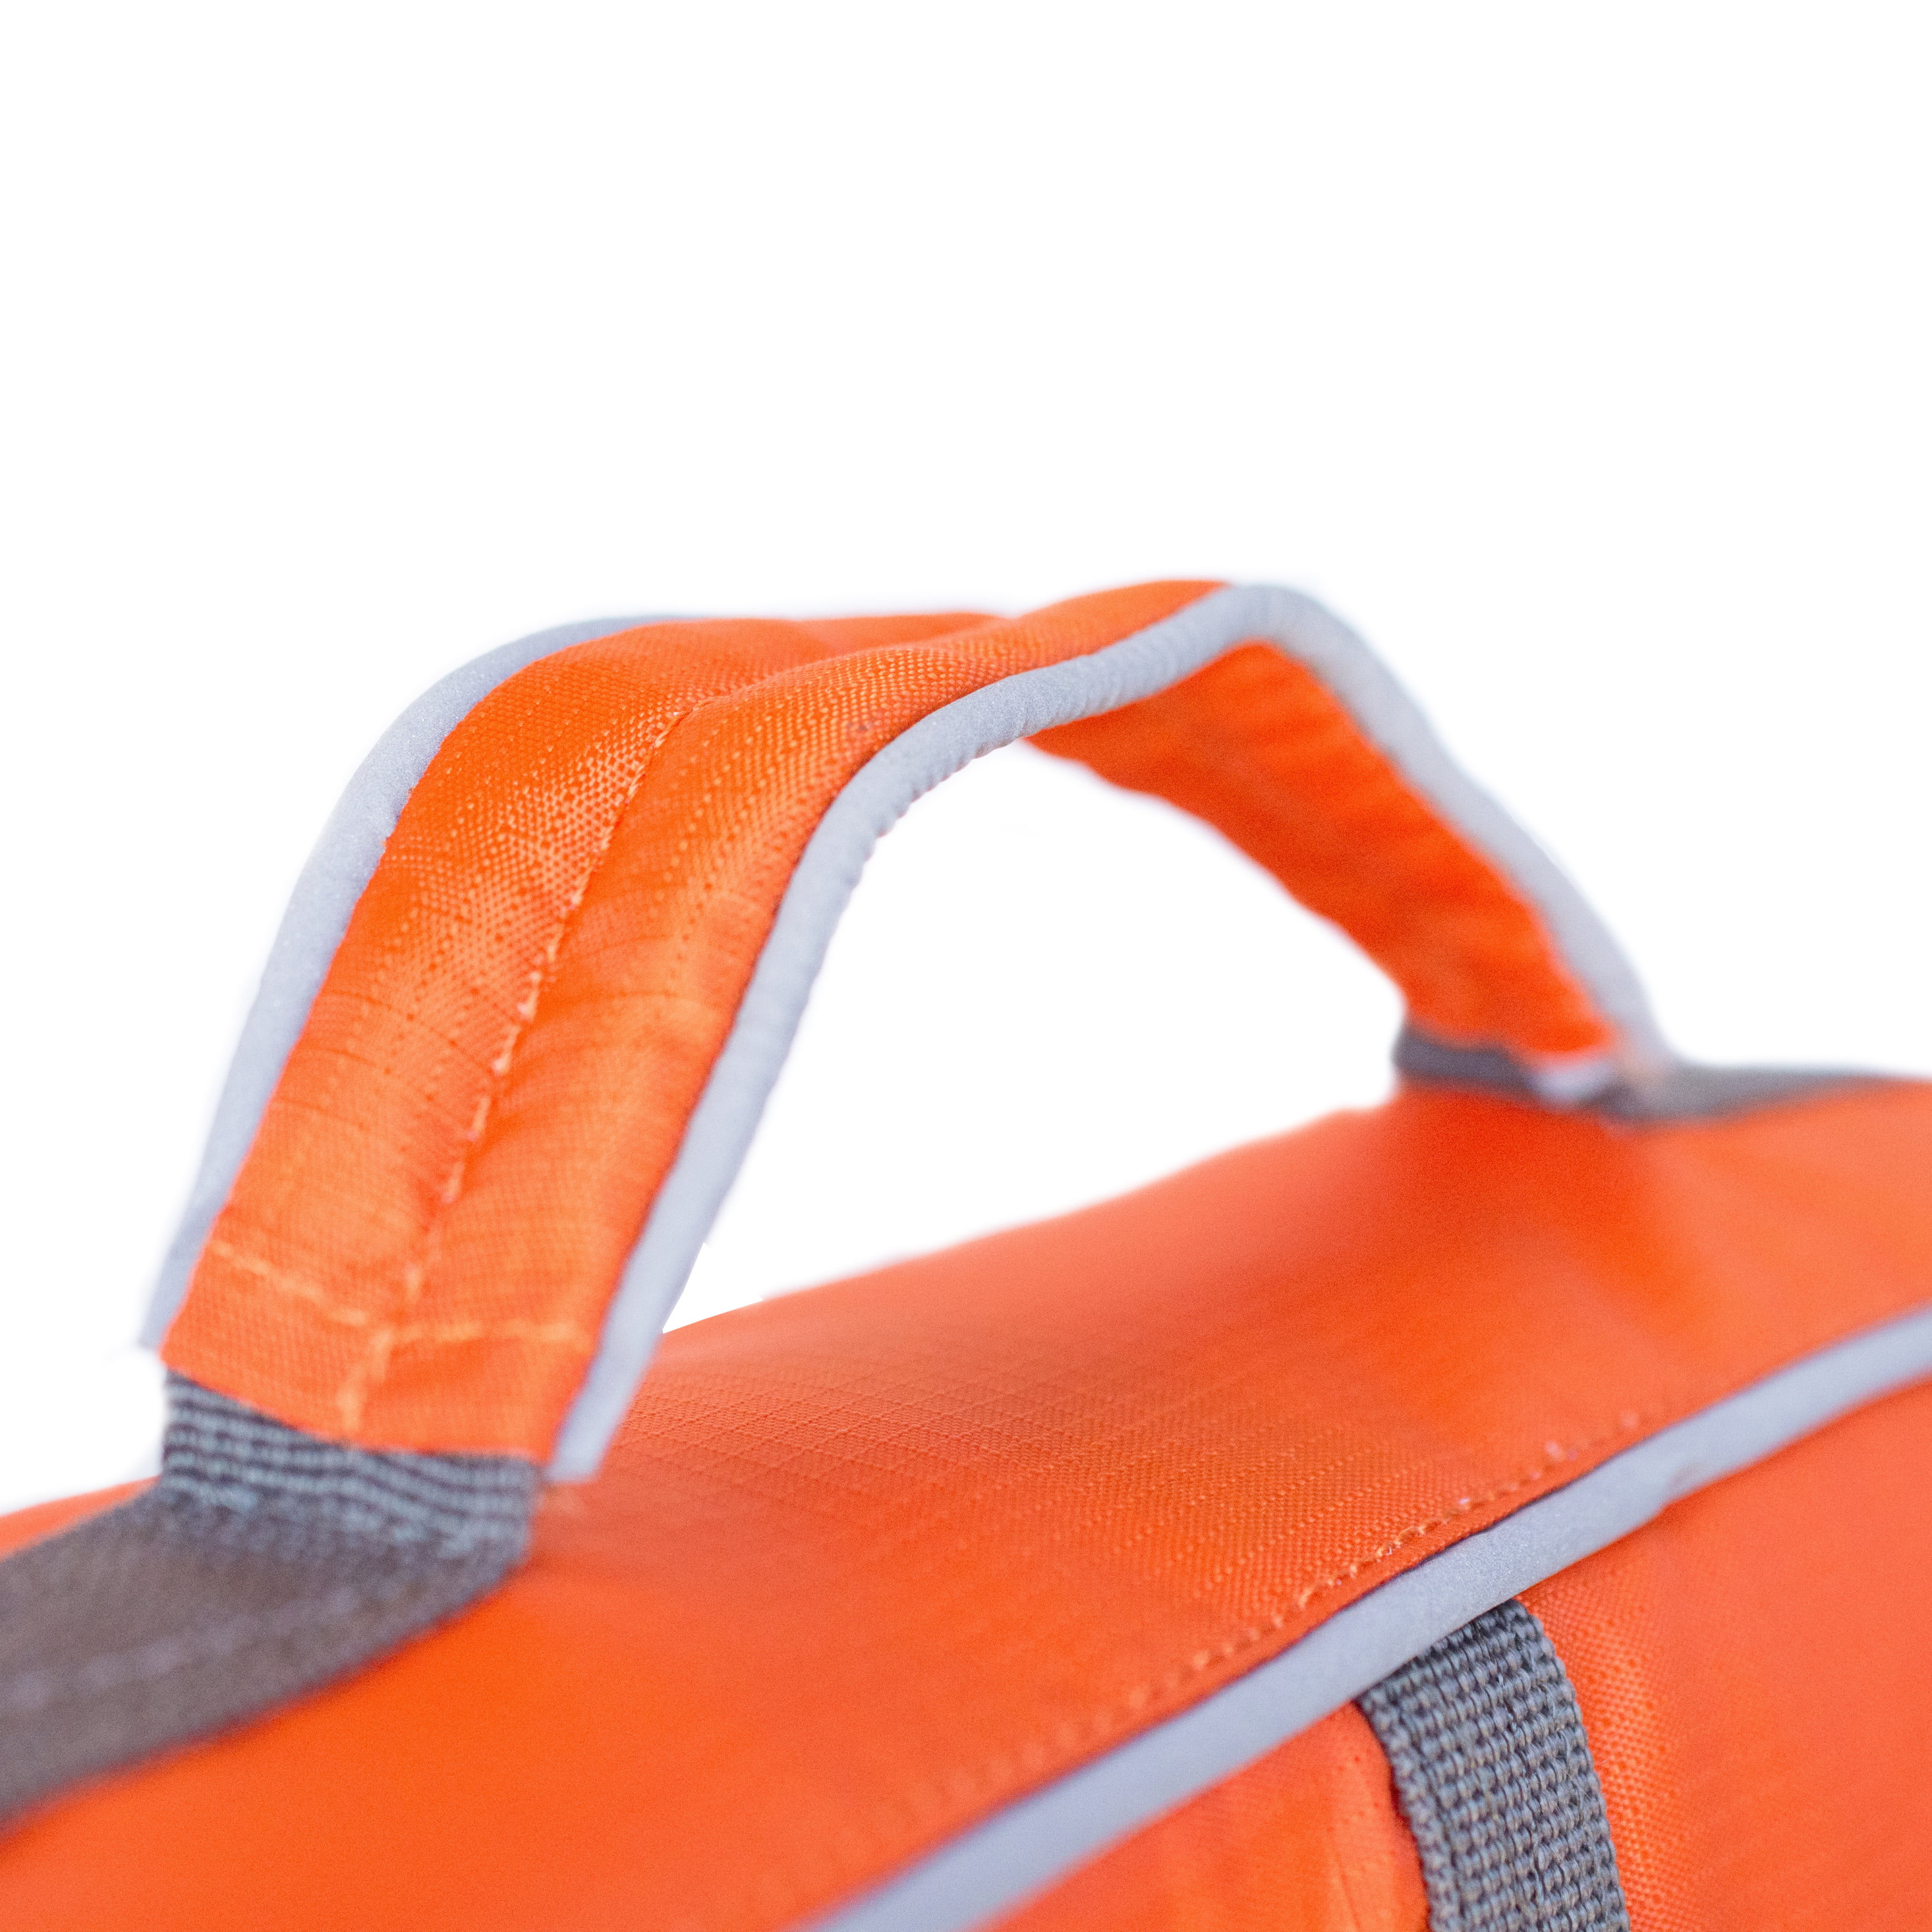 Pet Planet Canmore - Outward Hound's Granby Splash Dog Life Jacket is a  high-performance dog flotation device for boating, water sport adventures  and activities with dogs. Designed to keep your dog safe